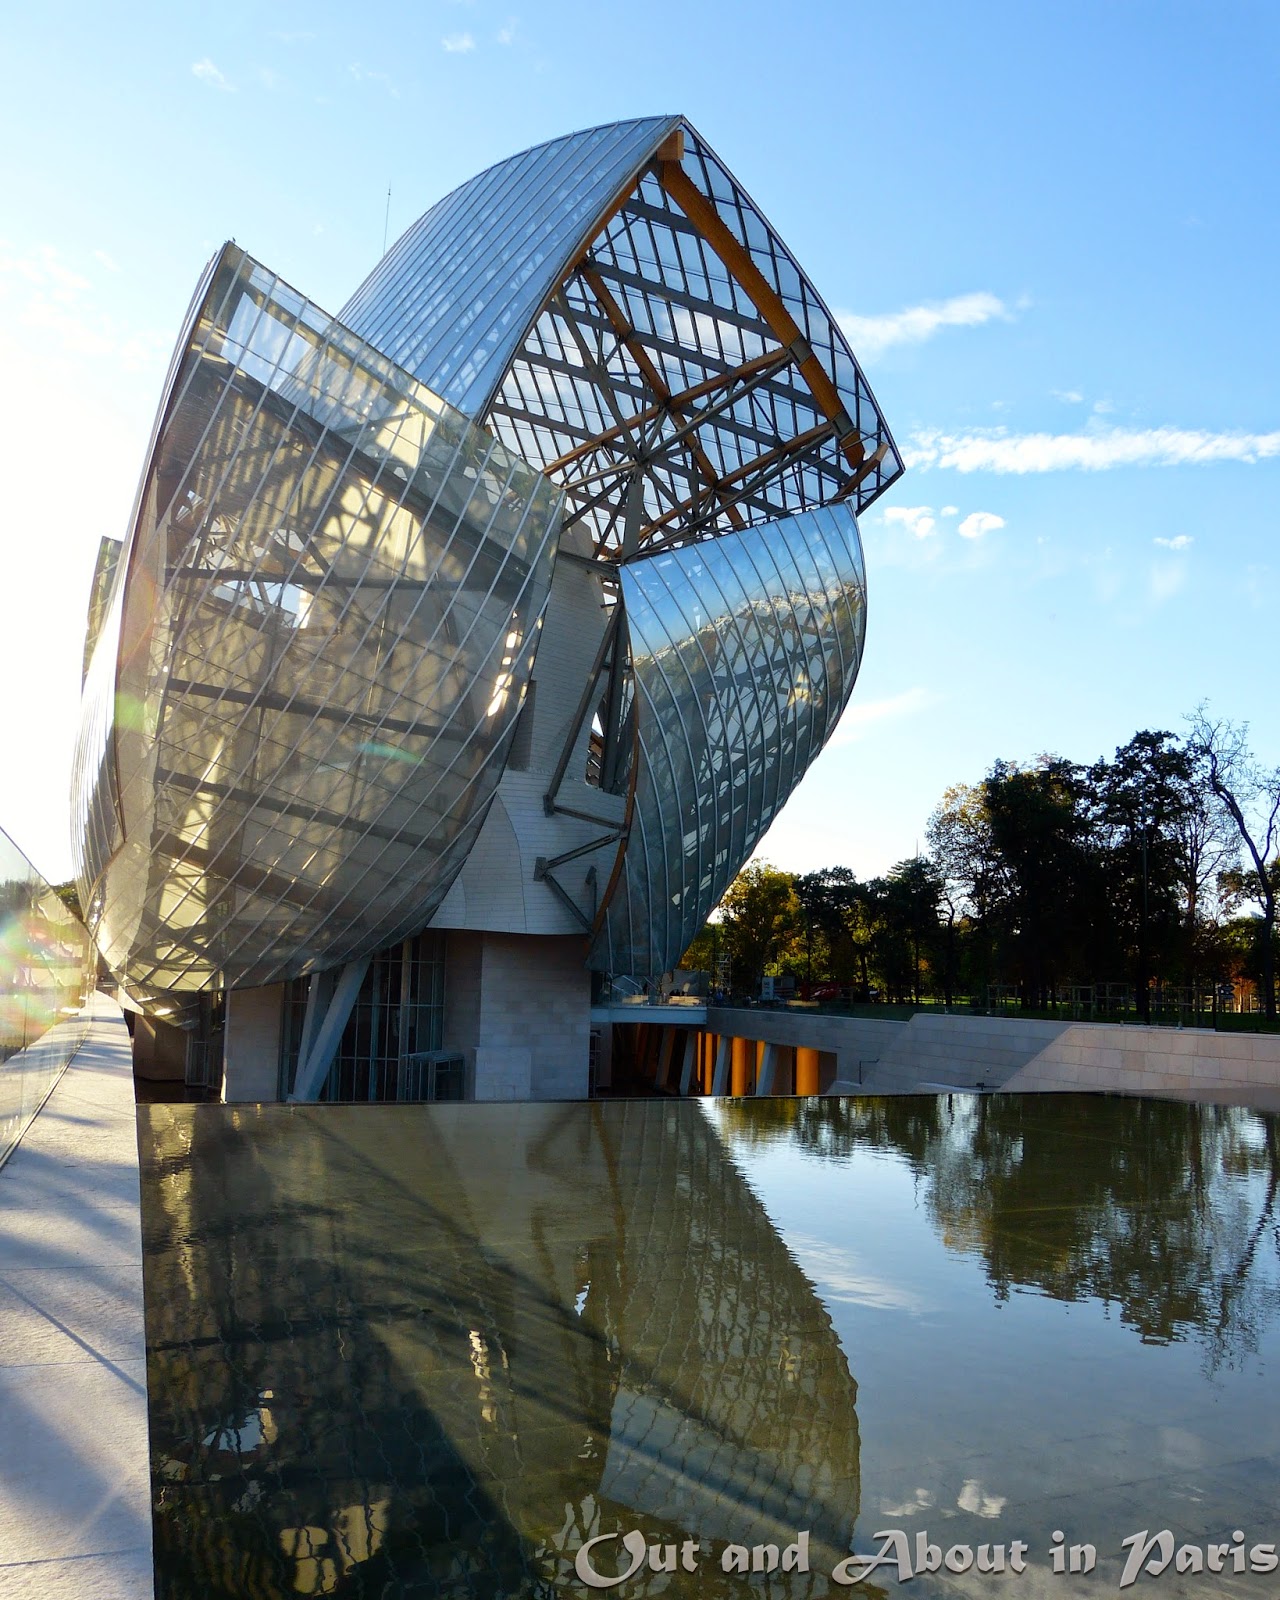 Gehry Monster: Fondation Louis Vuitton by Frank Gehry